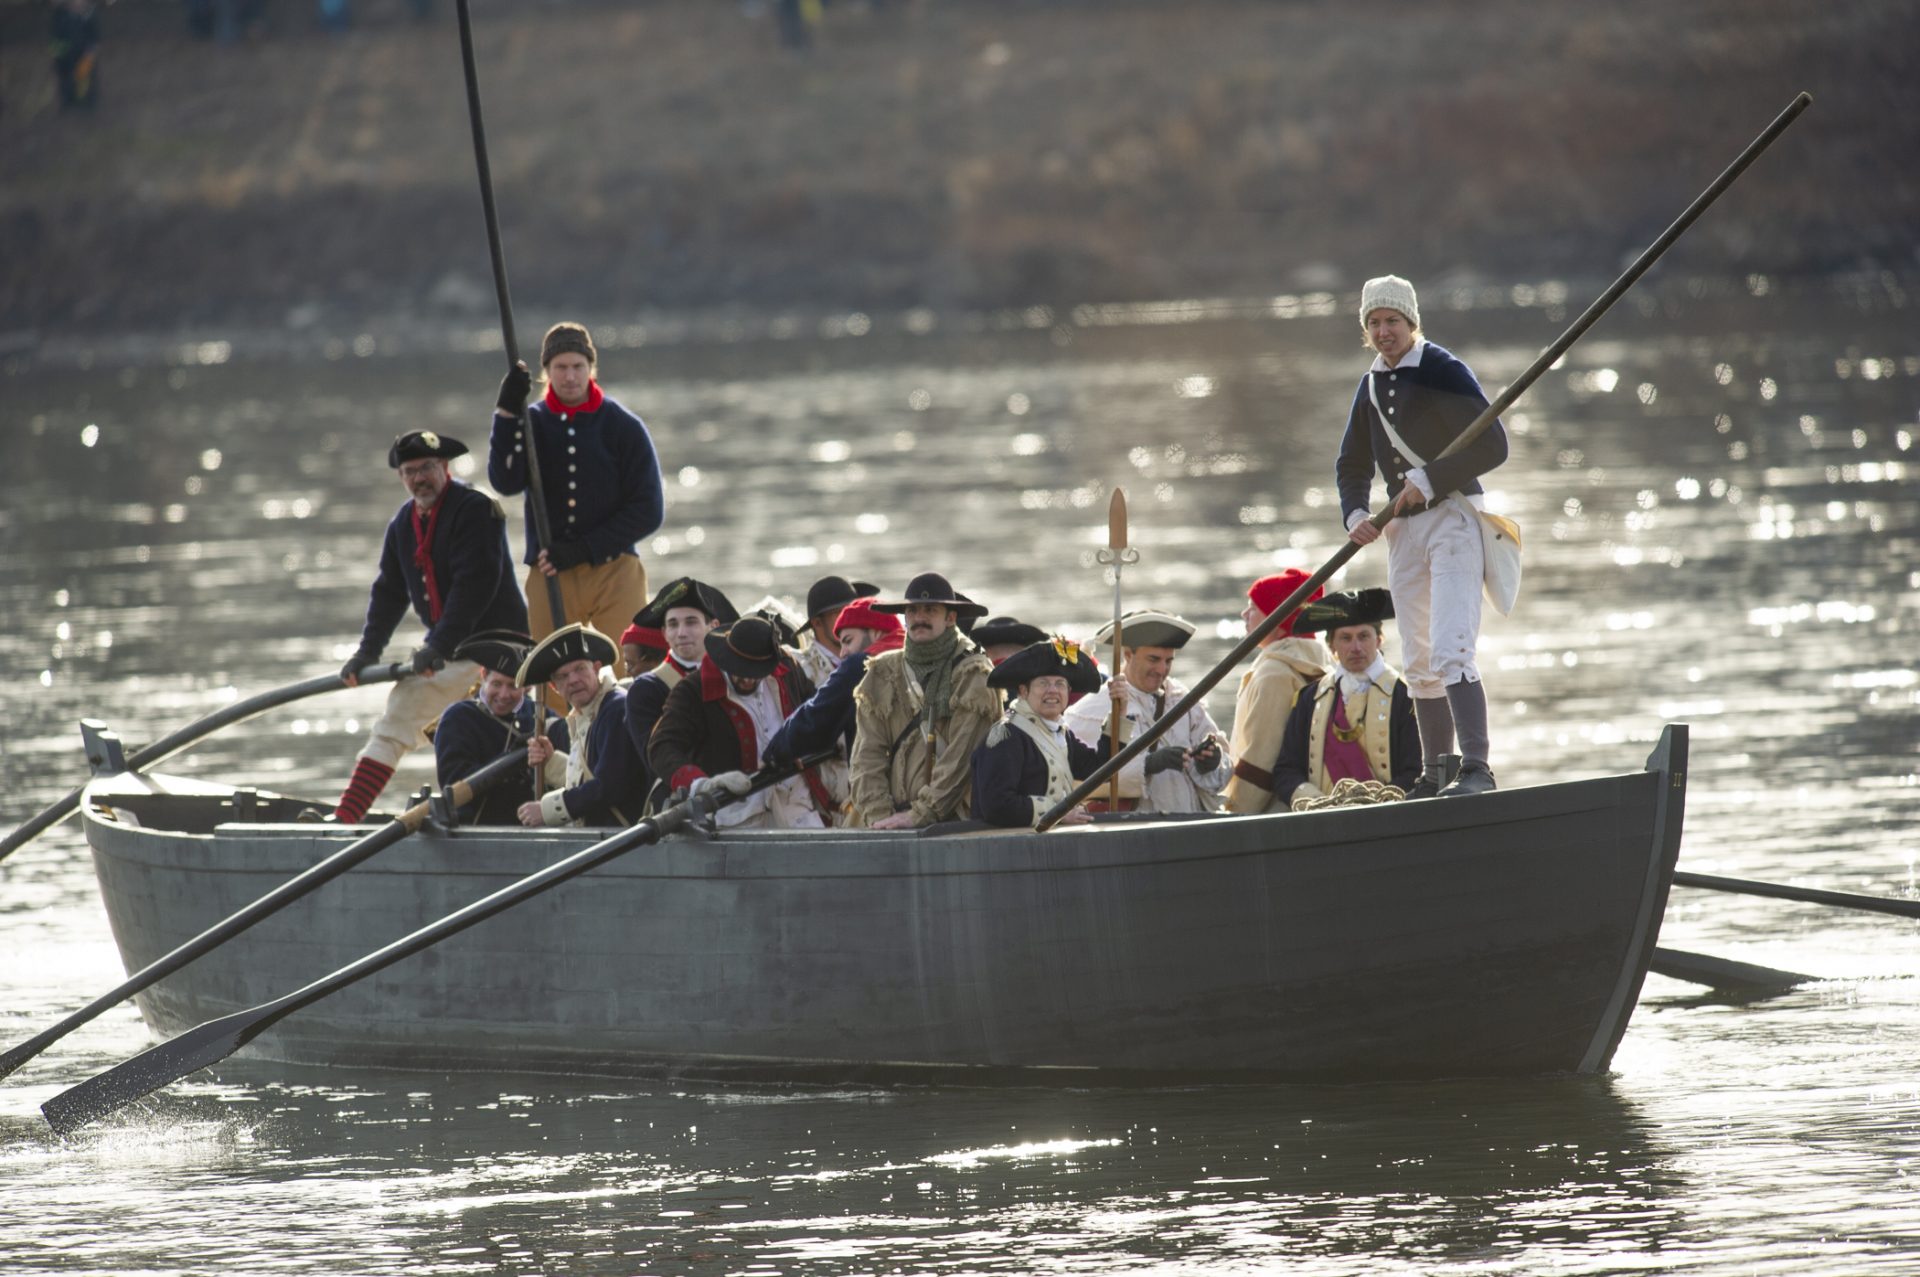 Revolutionary reenactors approach the New Jersey side of the Delaware River in a replica the Durham boat originally used in the crossing.